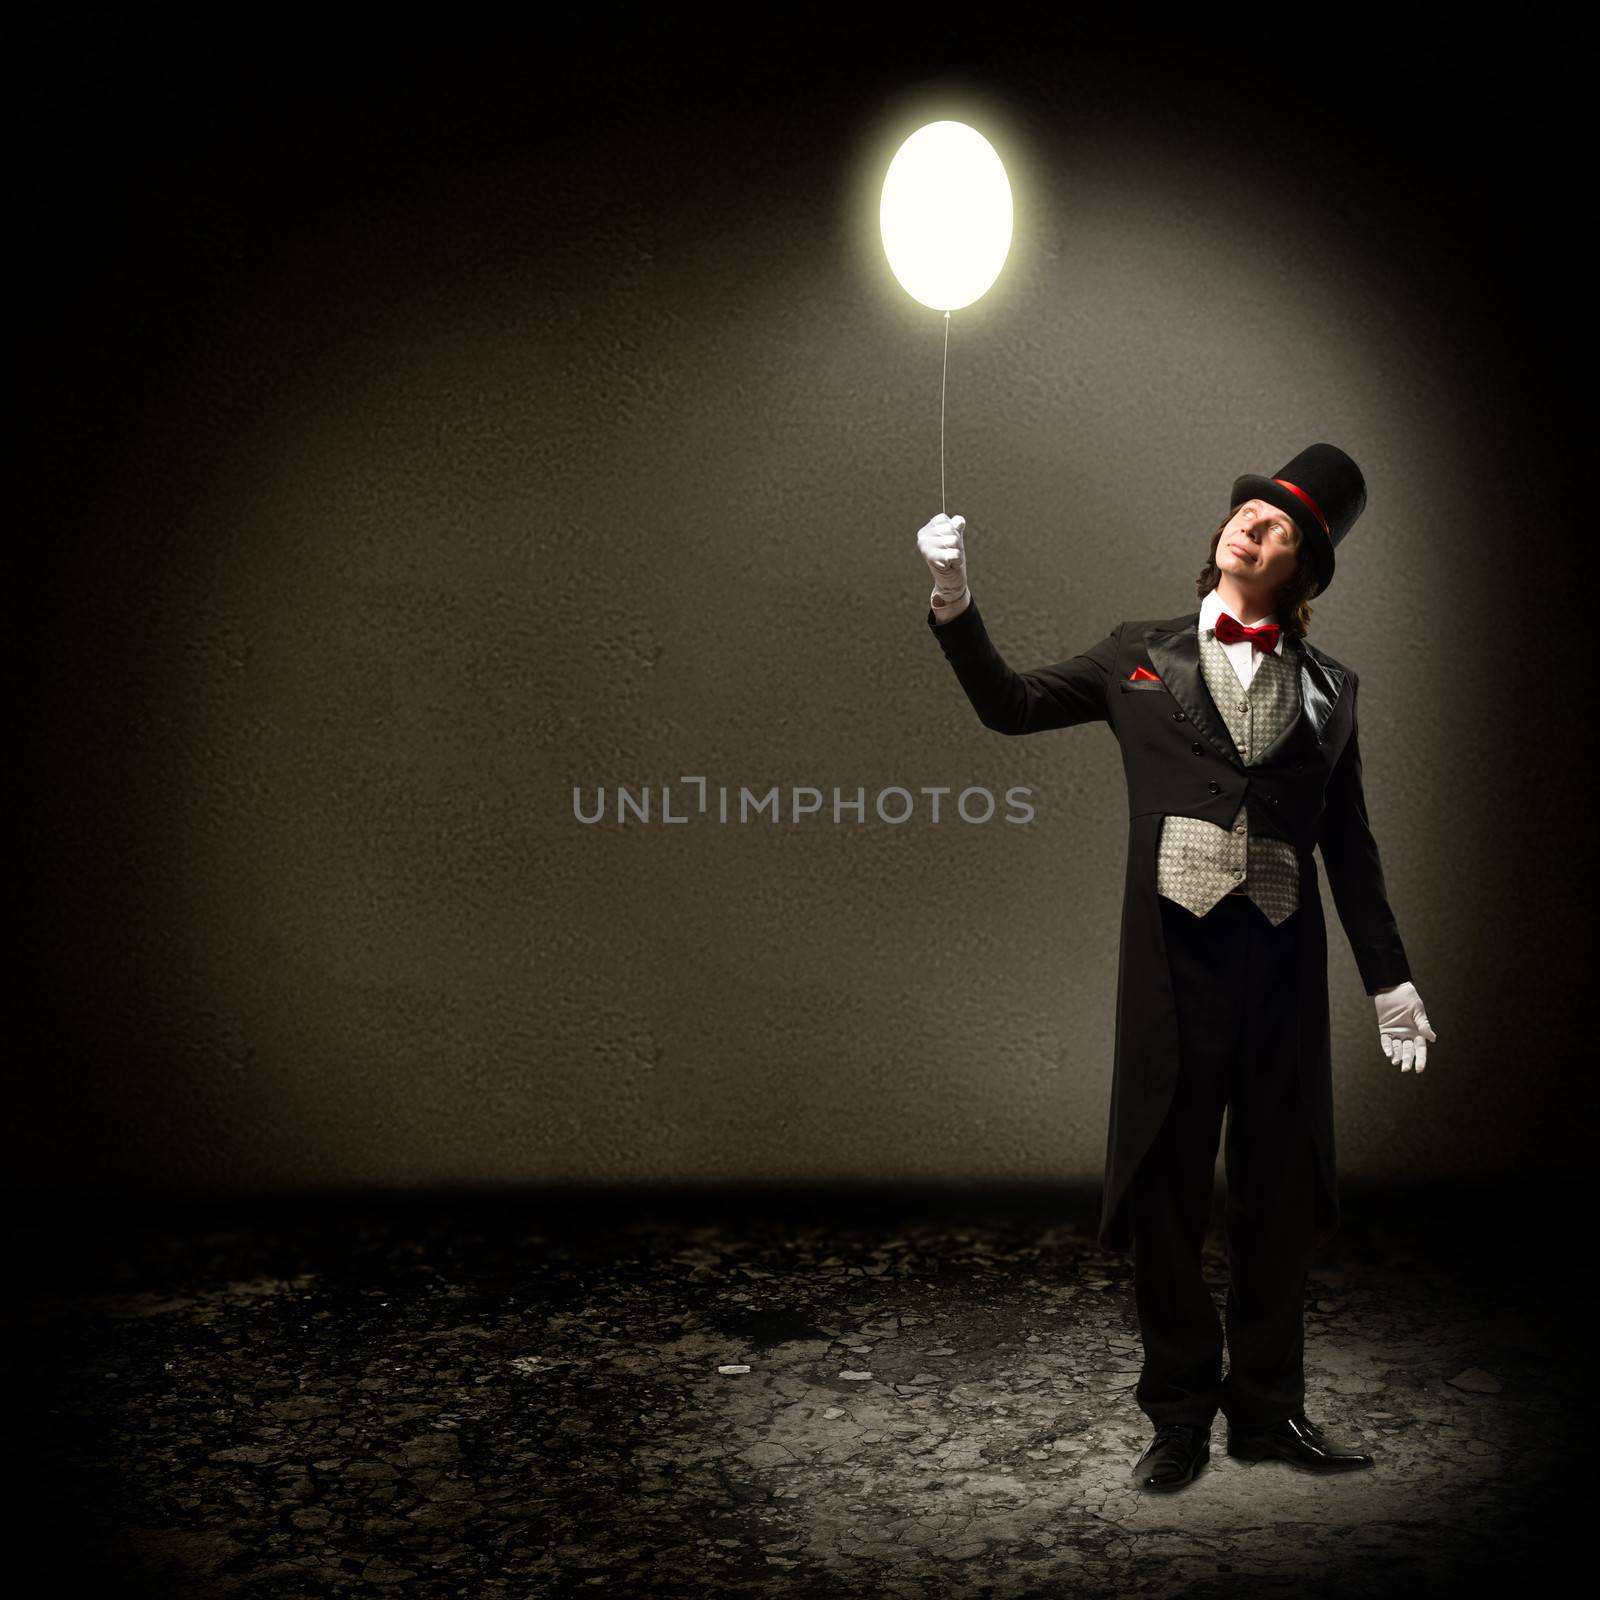 magician holding a glowing balloon by adam121